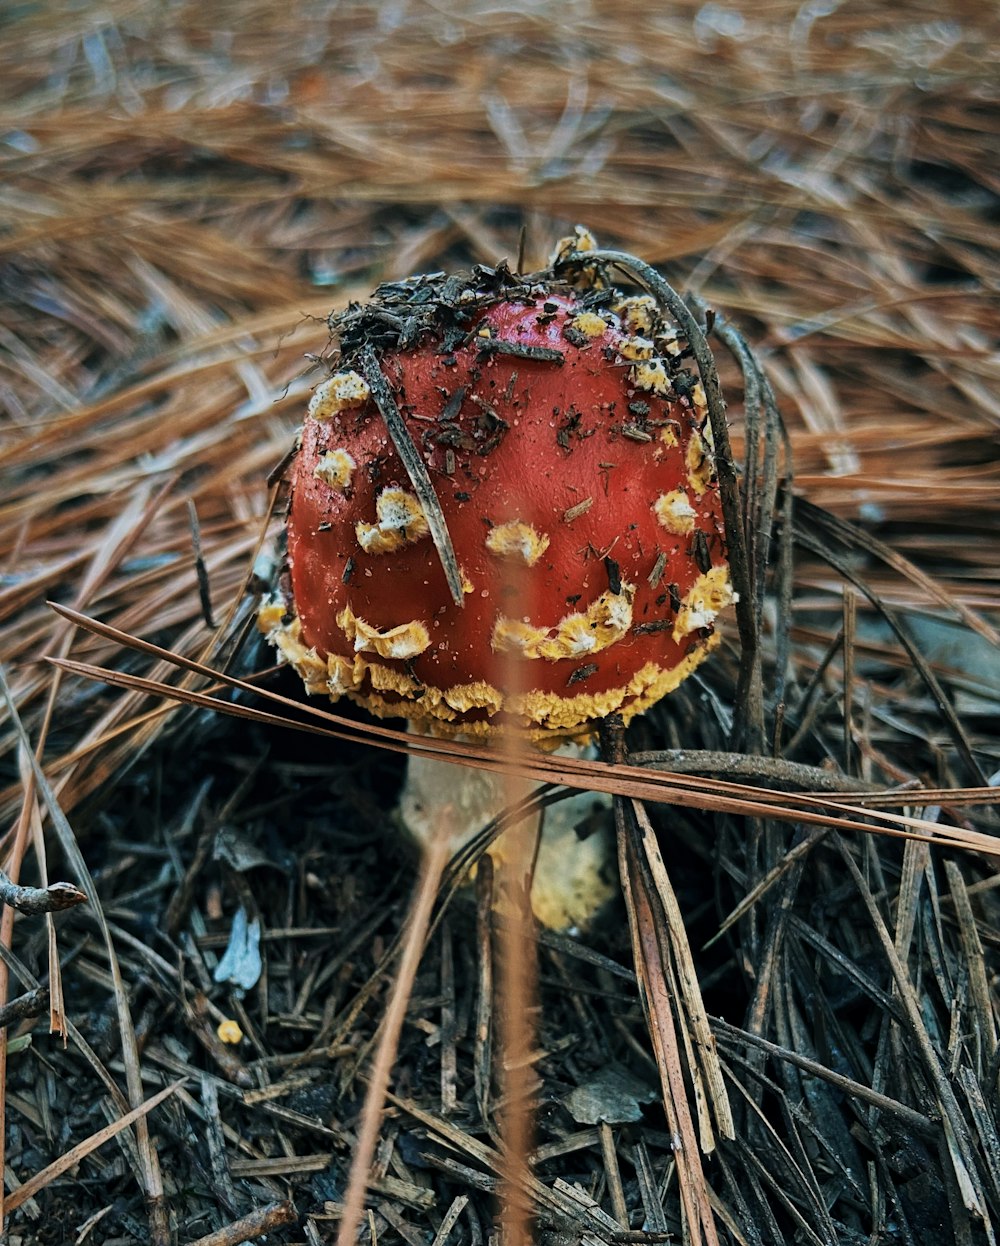 a red mushroom with yellow spots